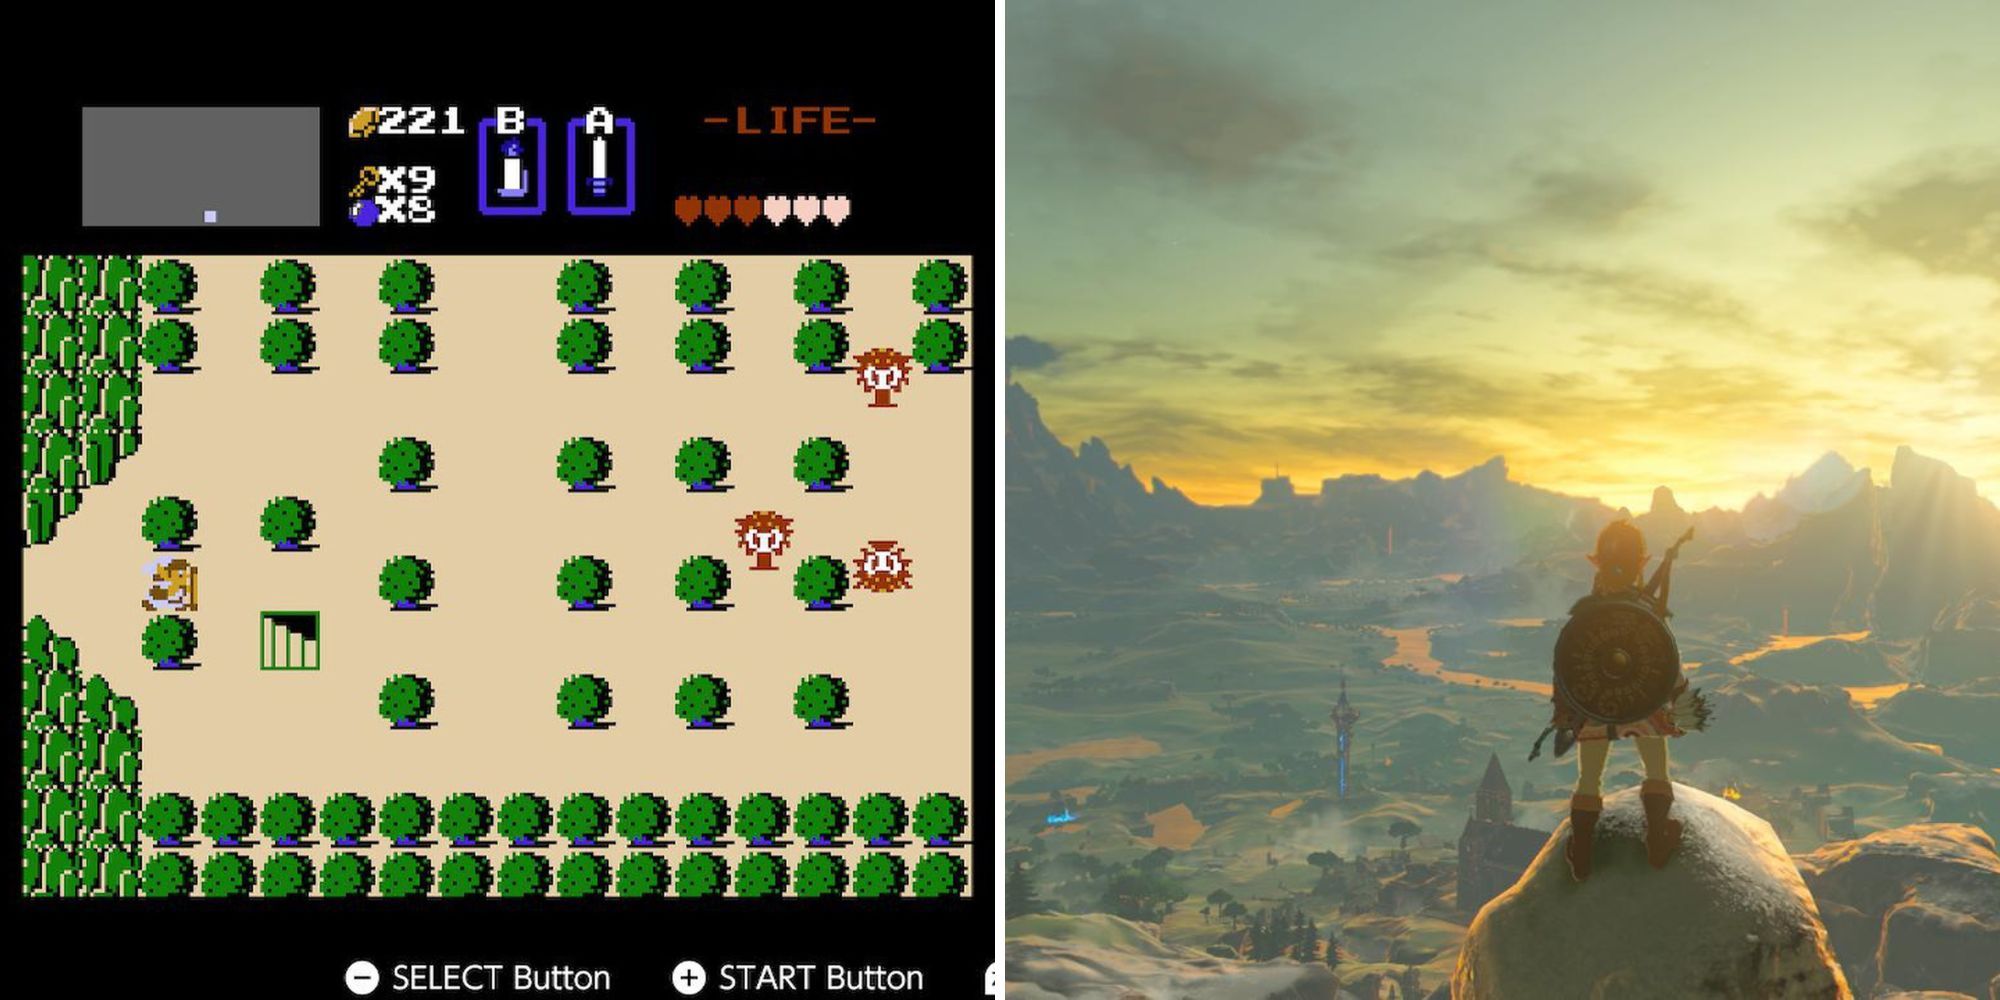 Images of both gameplay from the original Legend of Zelda and Link standing on a cliff looking at the world in Breath of The Wild